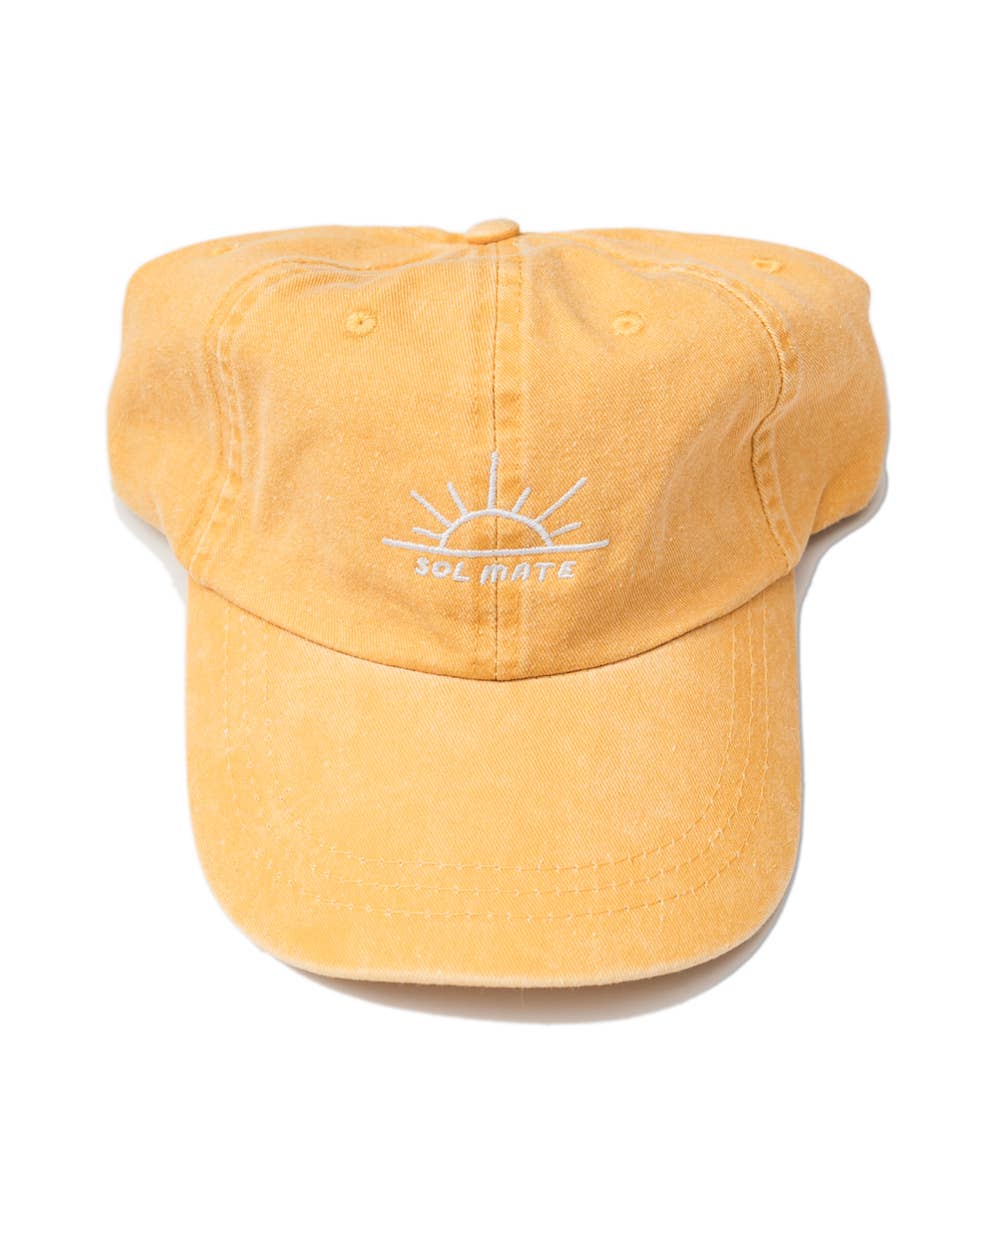 Sol Mate yellow dad hat by Keep Nature Wild